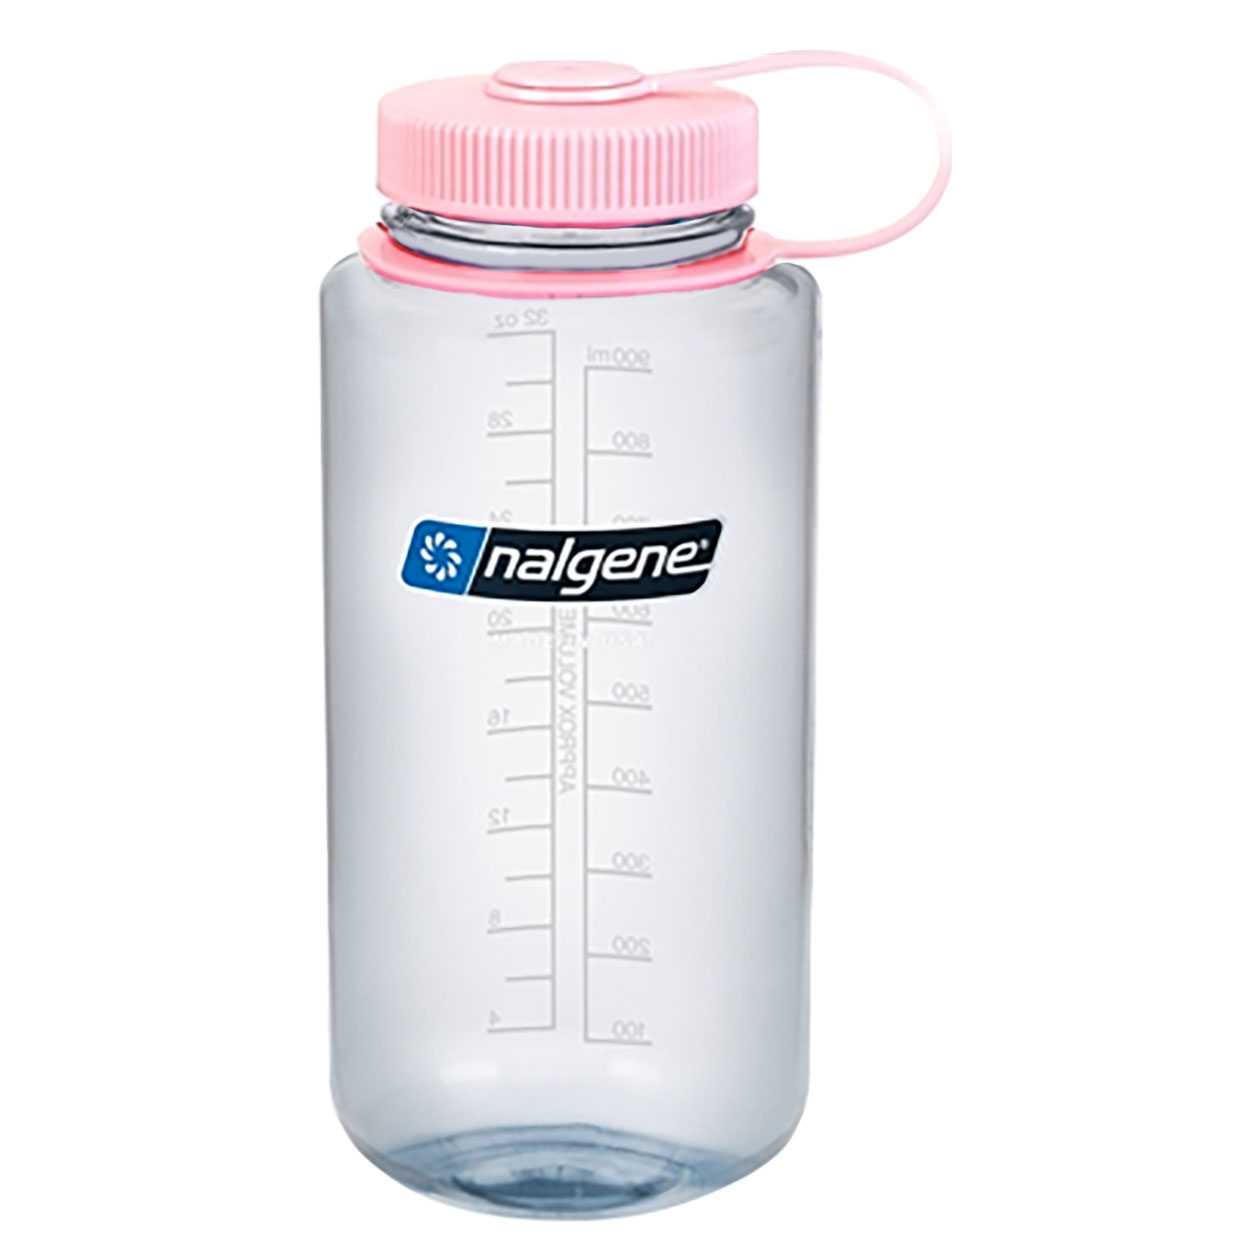 https://www.fuelforadventure.com/wp-content/uploads/2019/07/Nalgene_32oz_Wide_Mouth_Clear_with_Pink_Lid__32728.jpg